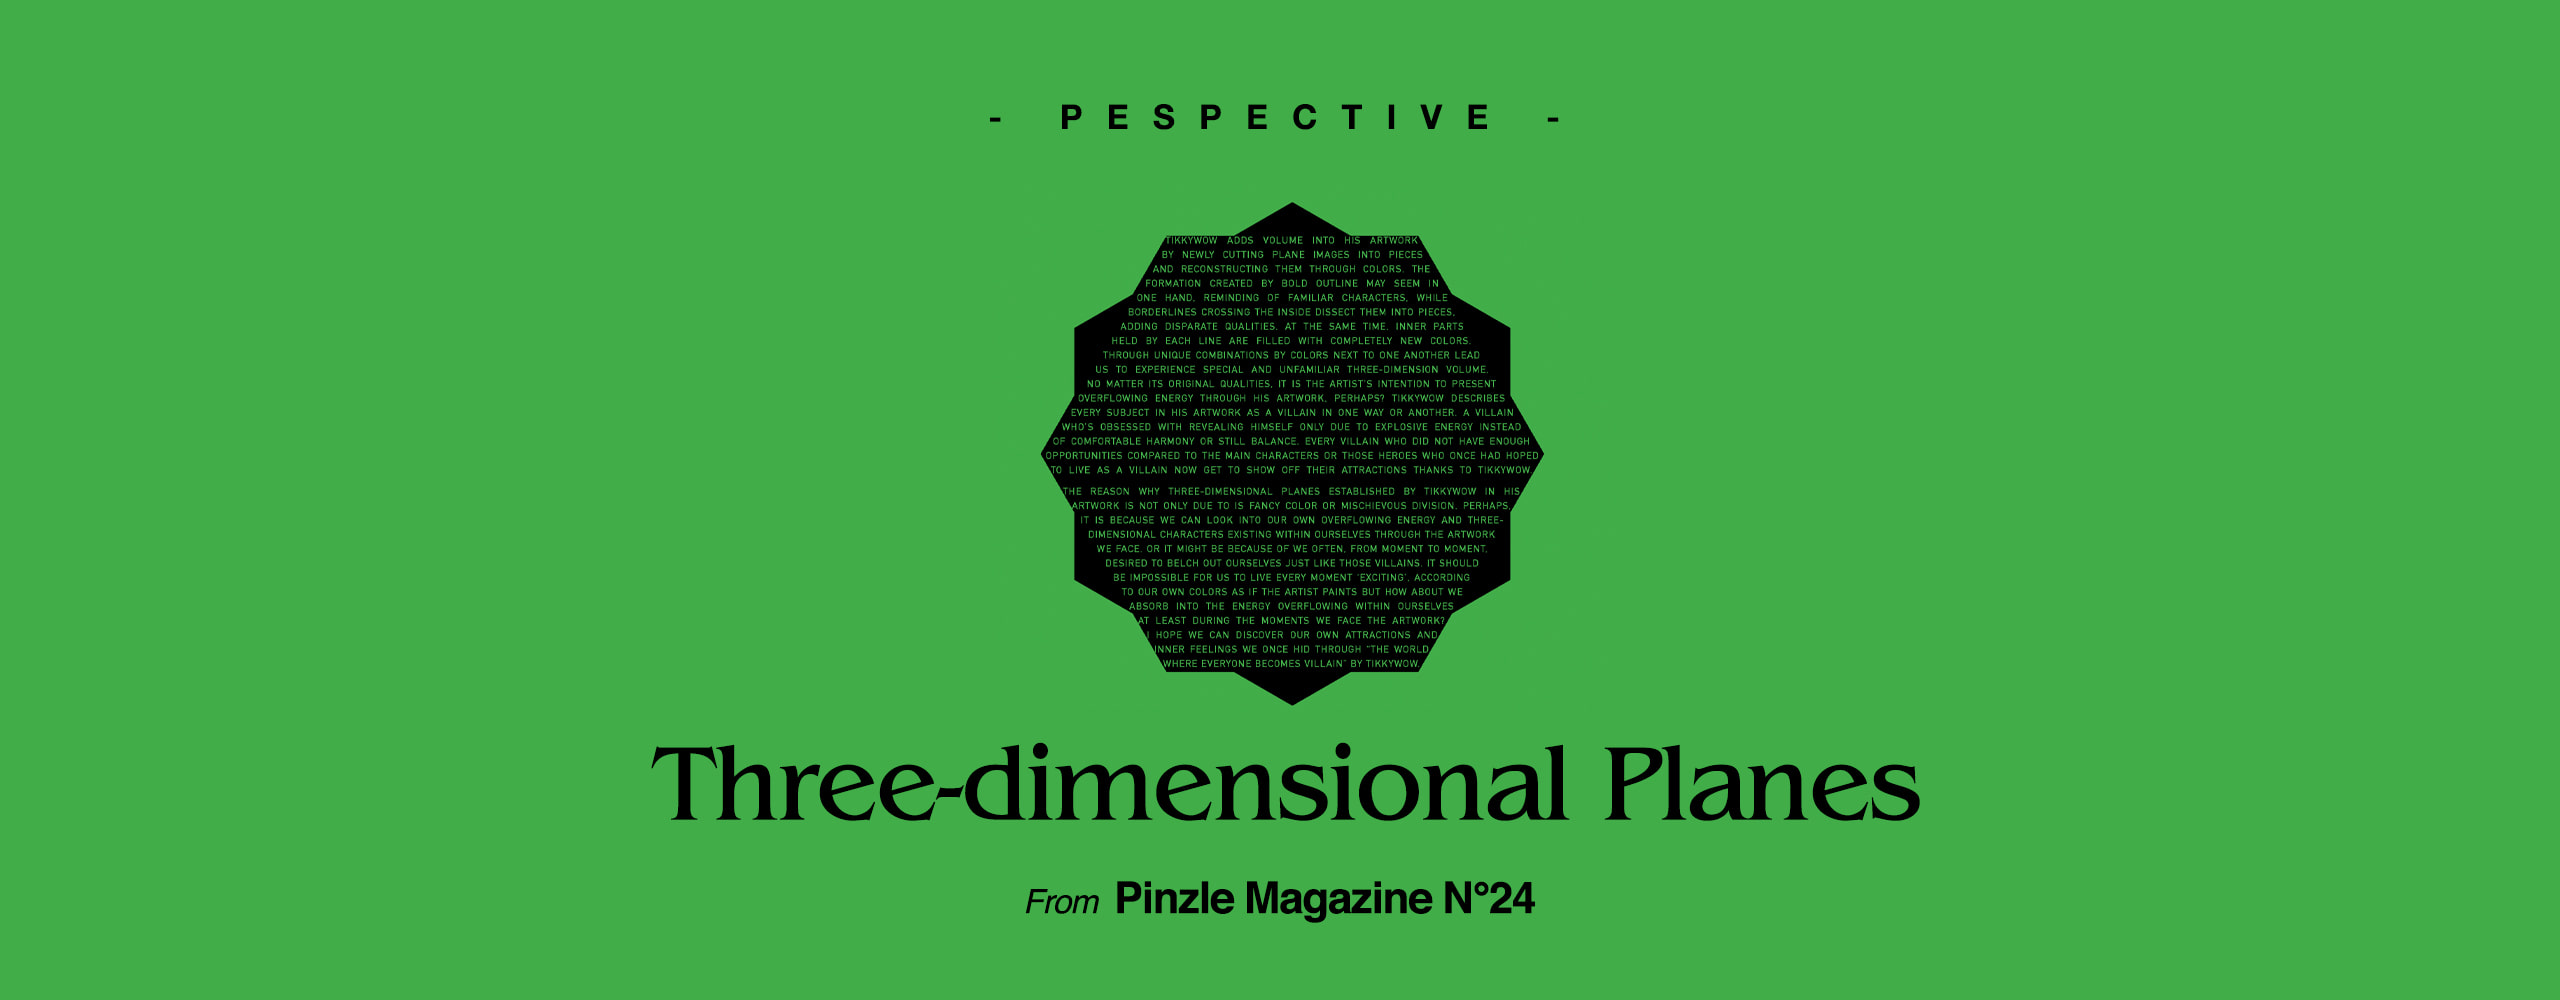 [PERSPECTIVE] Three-dimensional Planes